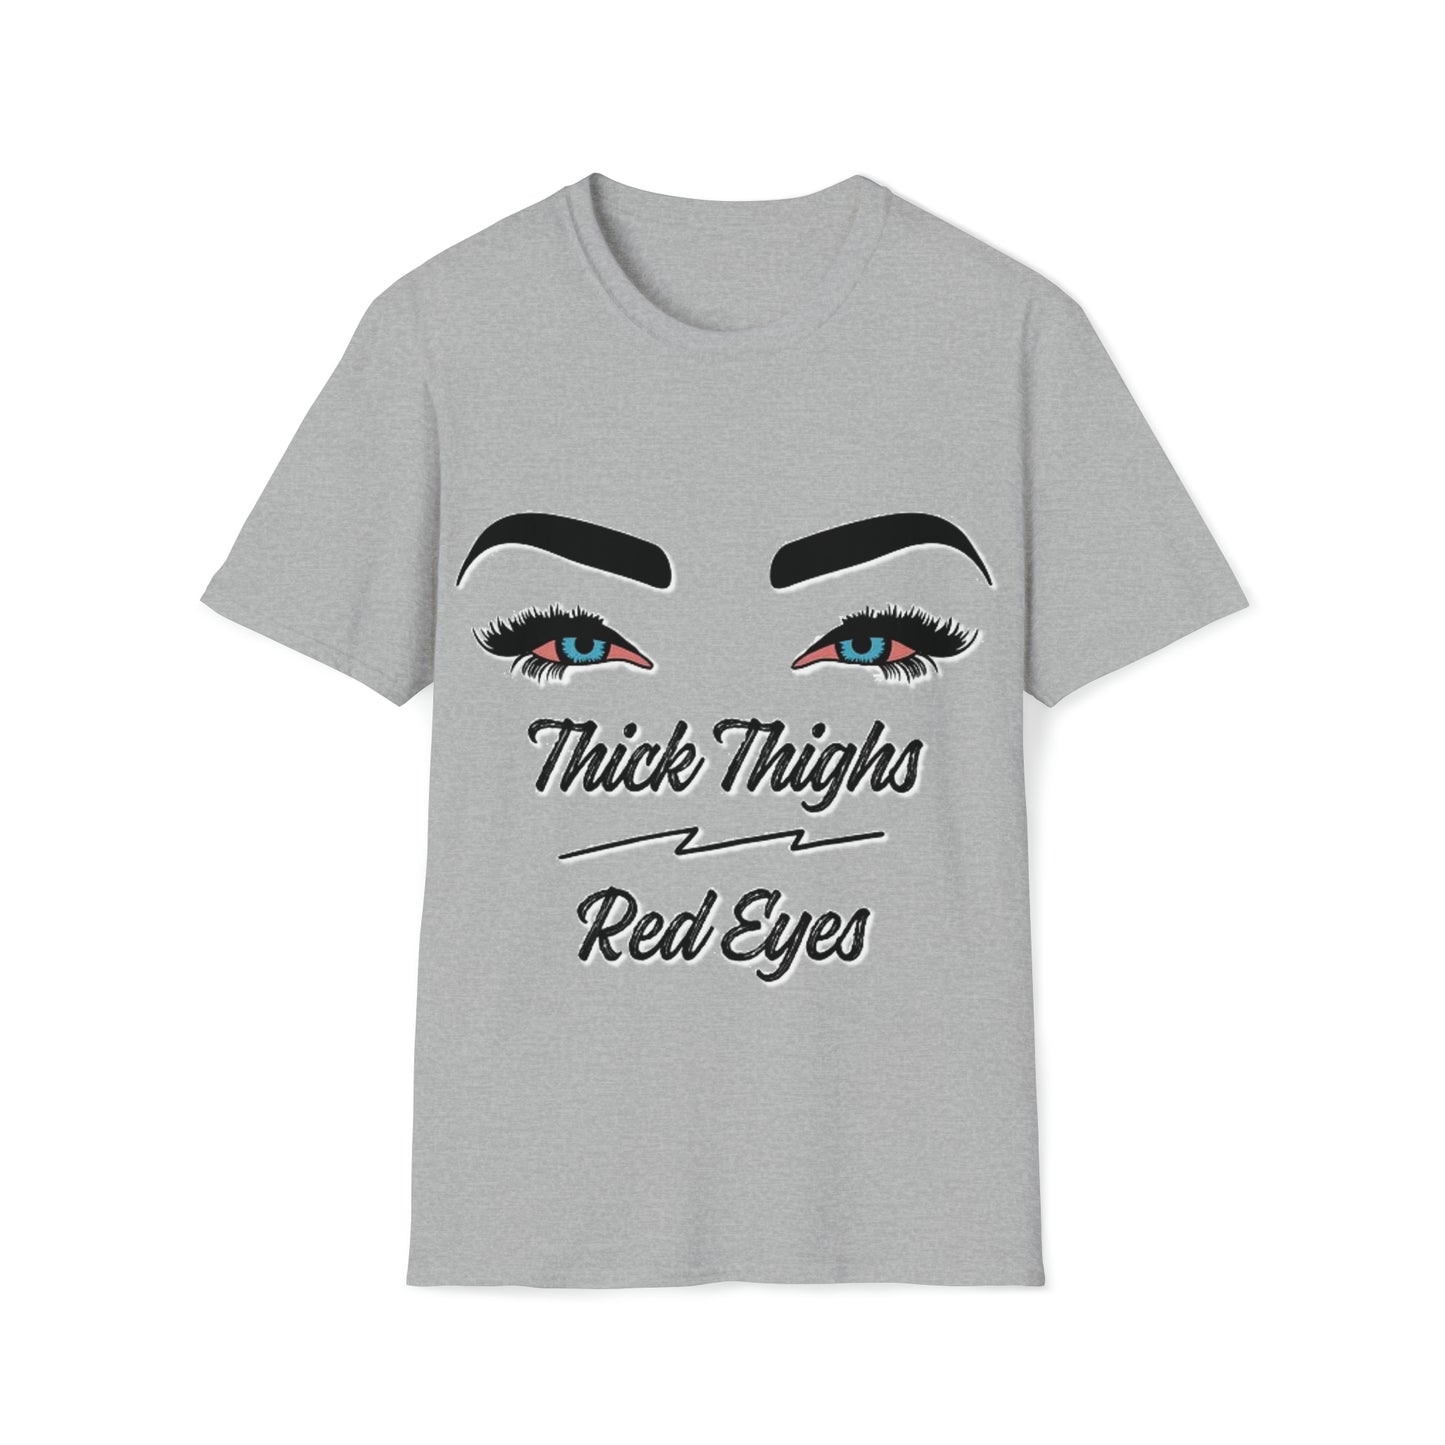 Thick Thighs Red Eyes Tee